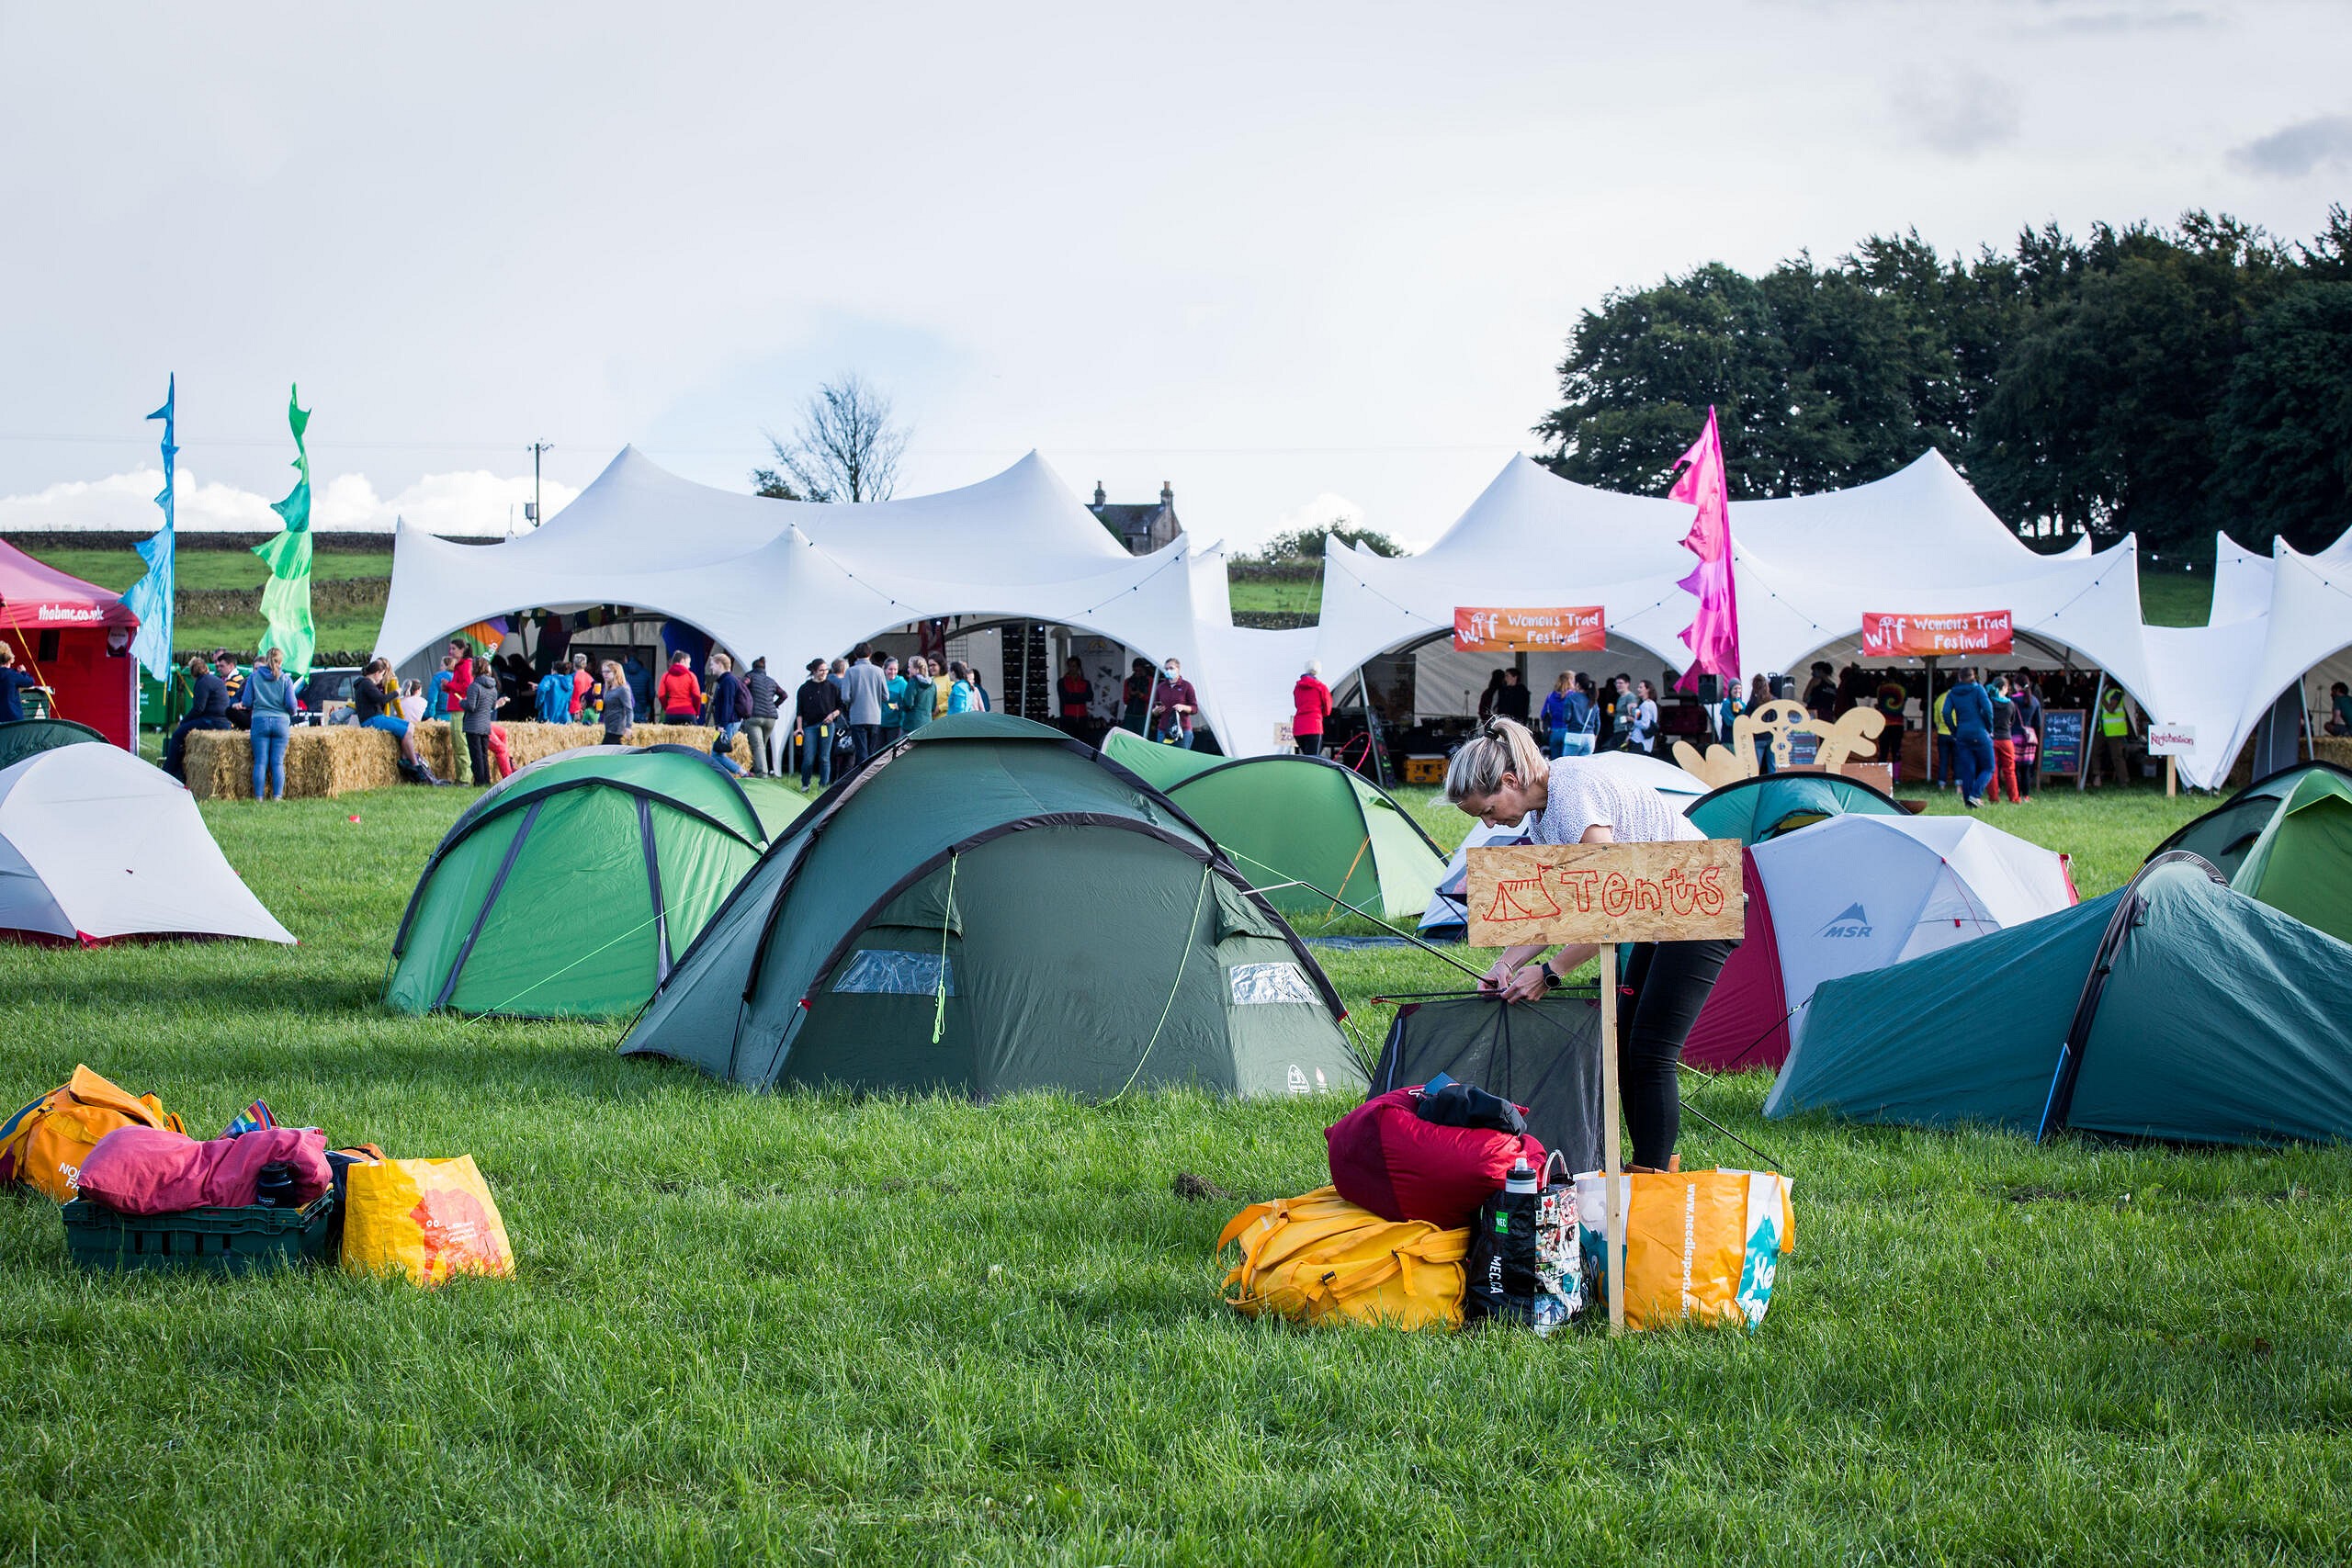 As the weekend drew to a close and the tents dwindled, many remarked on the unwavering psyche of the leaders, learners and ment  © Jessie Leong - jessieleong.co.uk